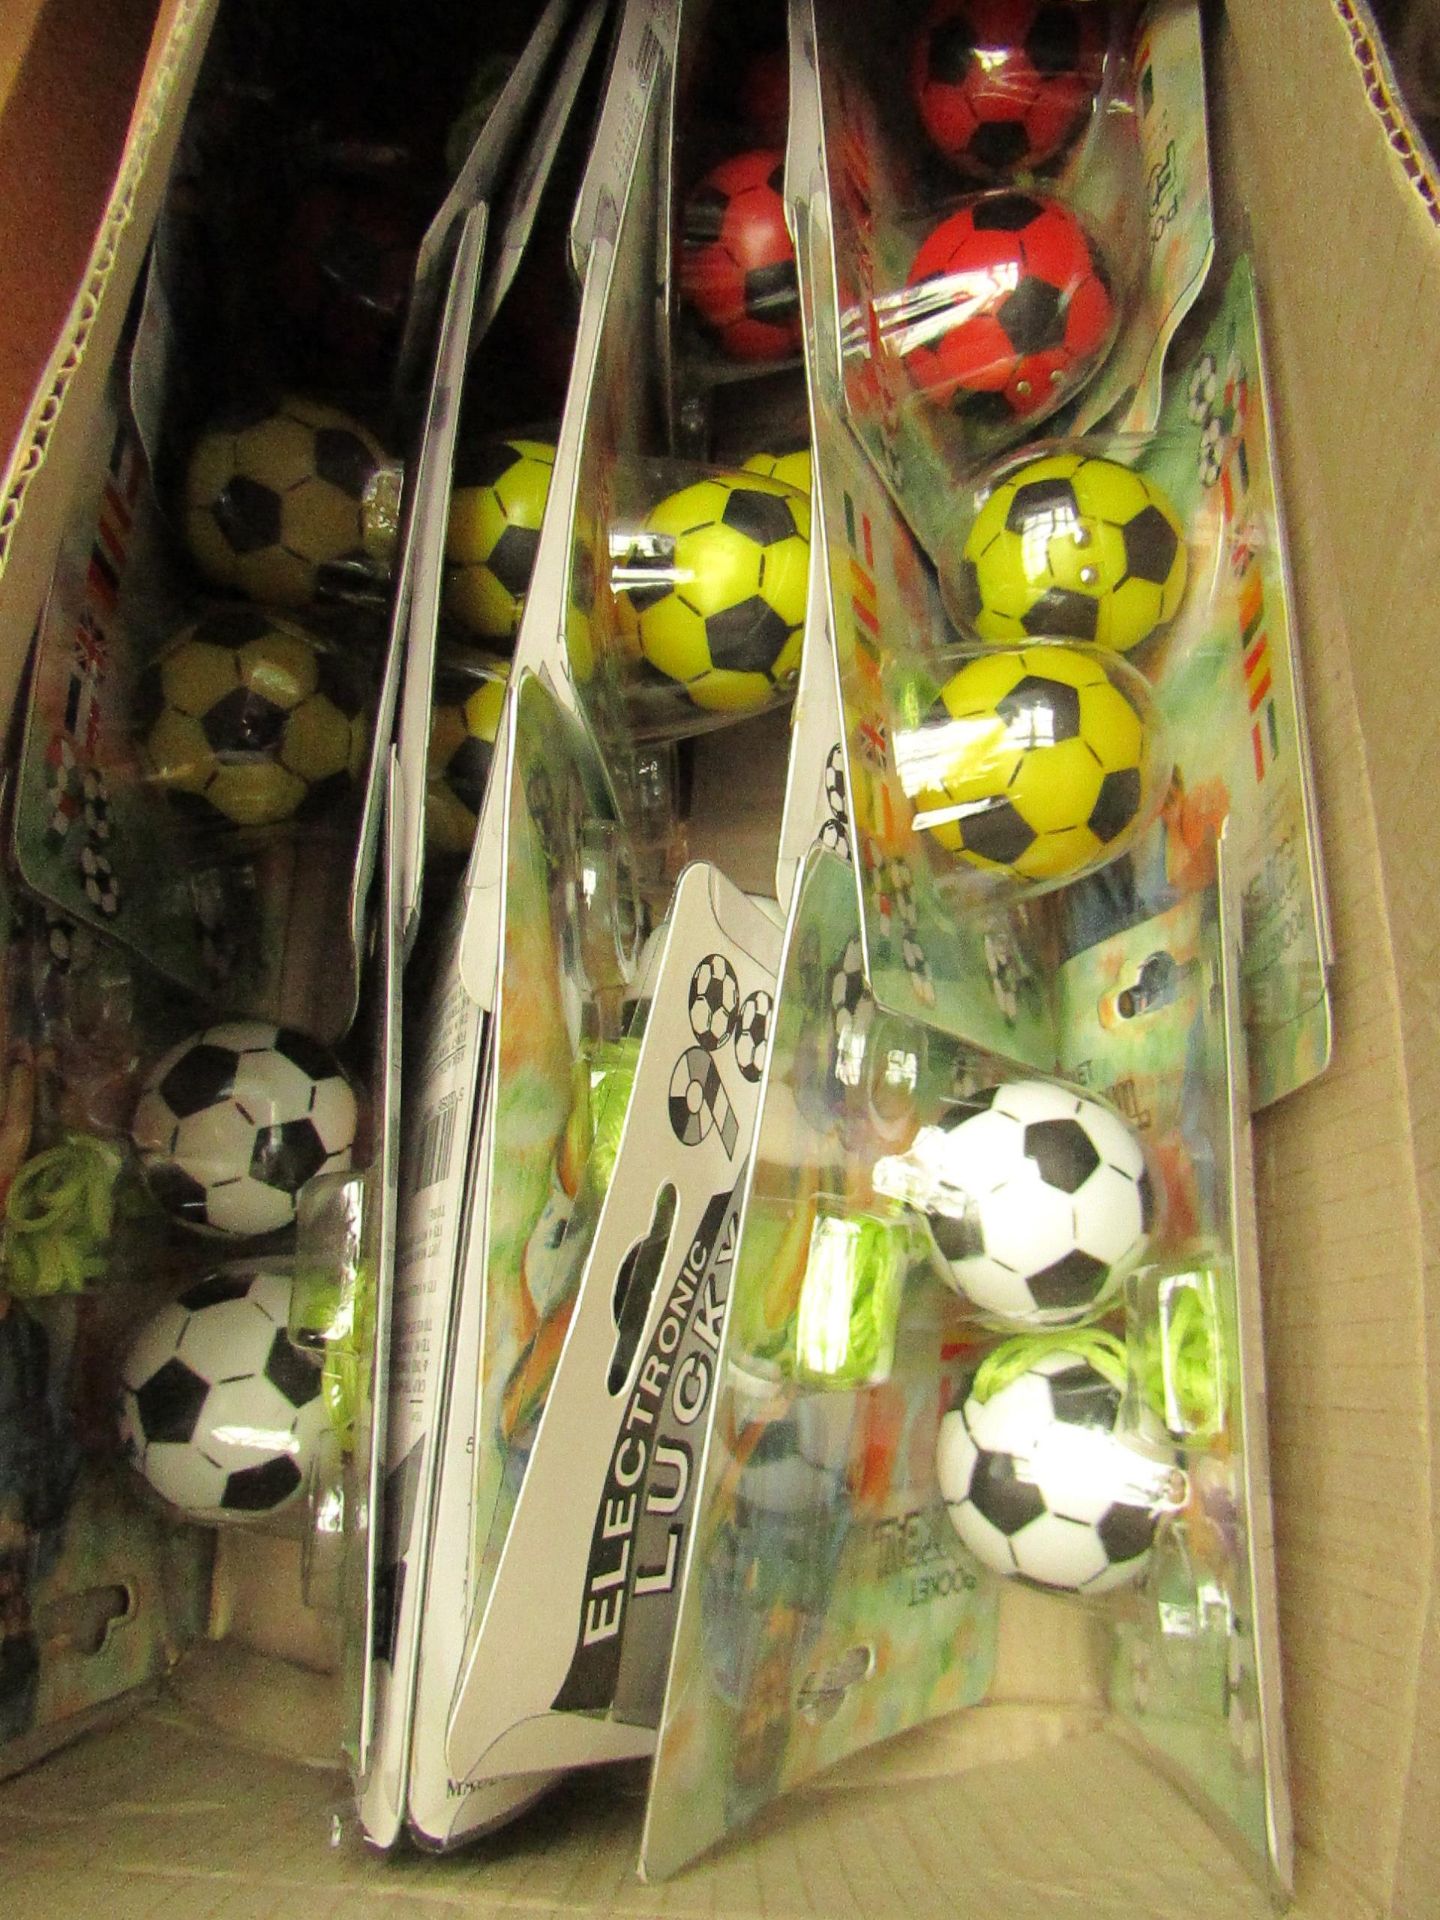 2 x boxes of 25 per box Pocket Football Electronic Lucky Ball Necklaces Sings "Ole Ole Ole" etc